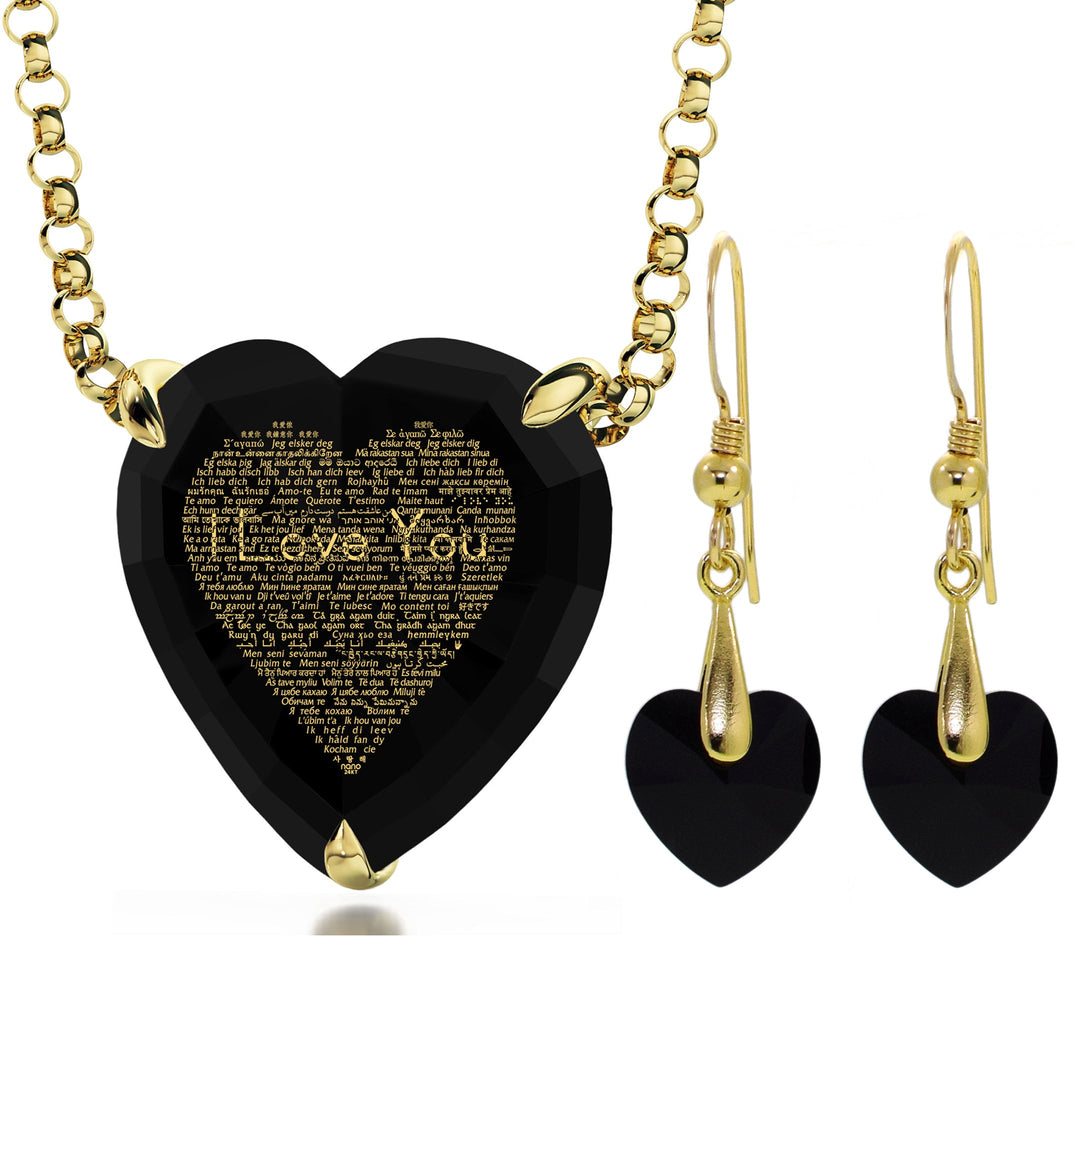 Gold Plated Silver Heart Jewelry Set 120 Languages I Love You Necklace and Crystal Earrings